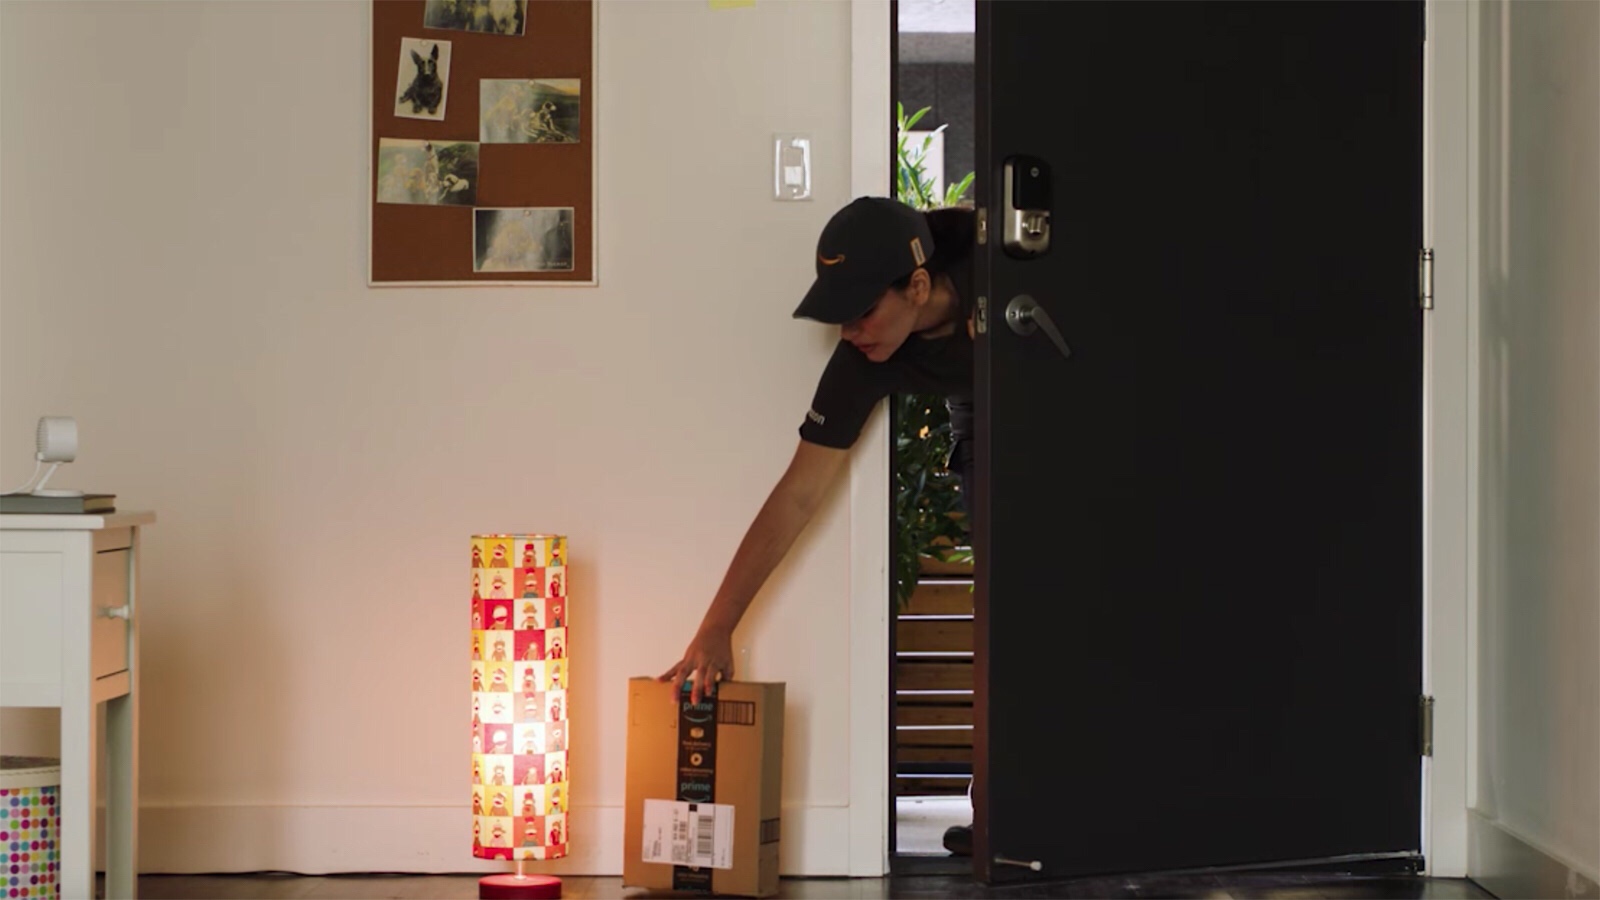 Amazon Key brings fingerprint authentication to allow for in-home deliveries